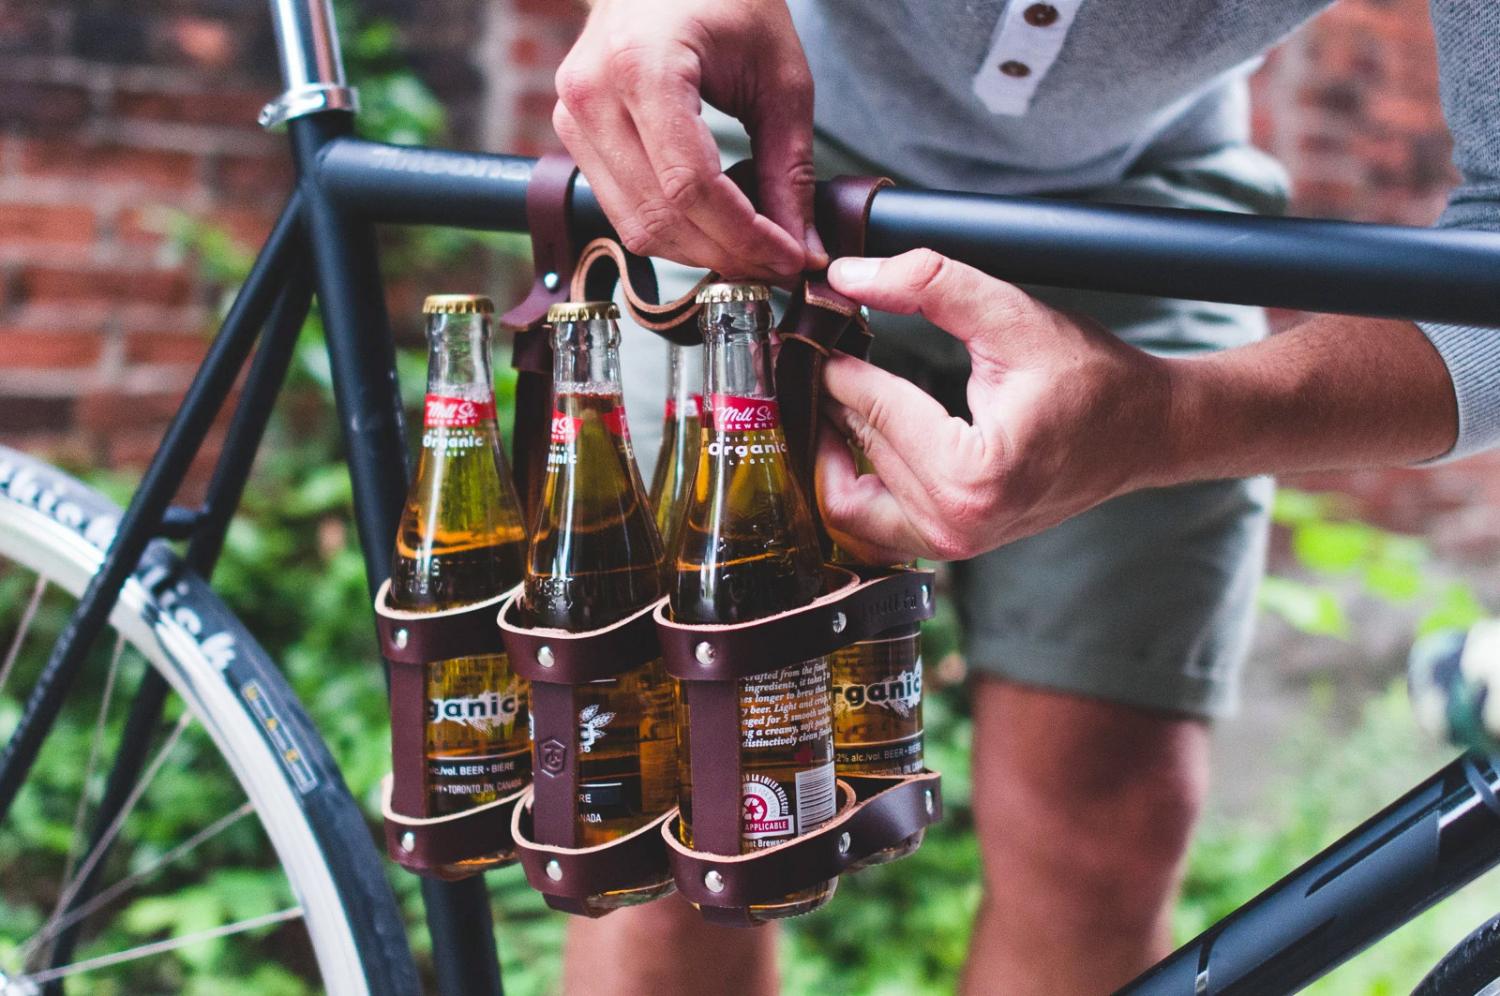 6 pack of beer holder for your bicycle - craft brew bicycle mount